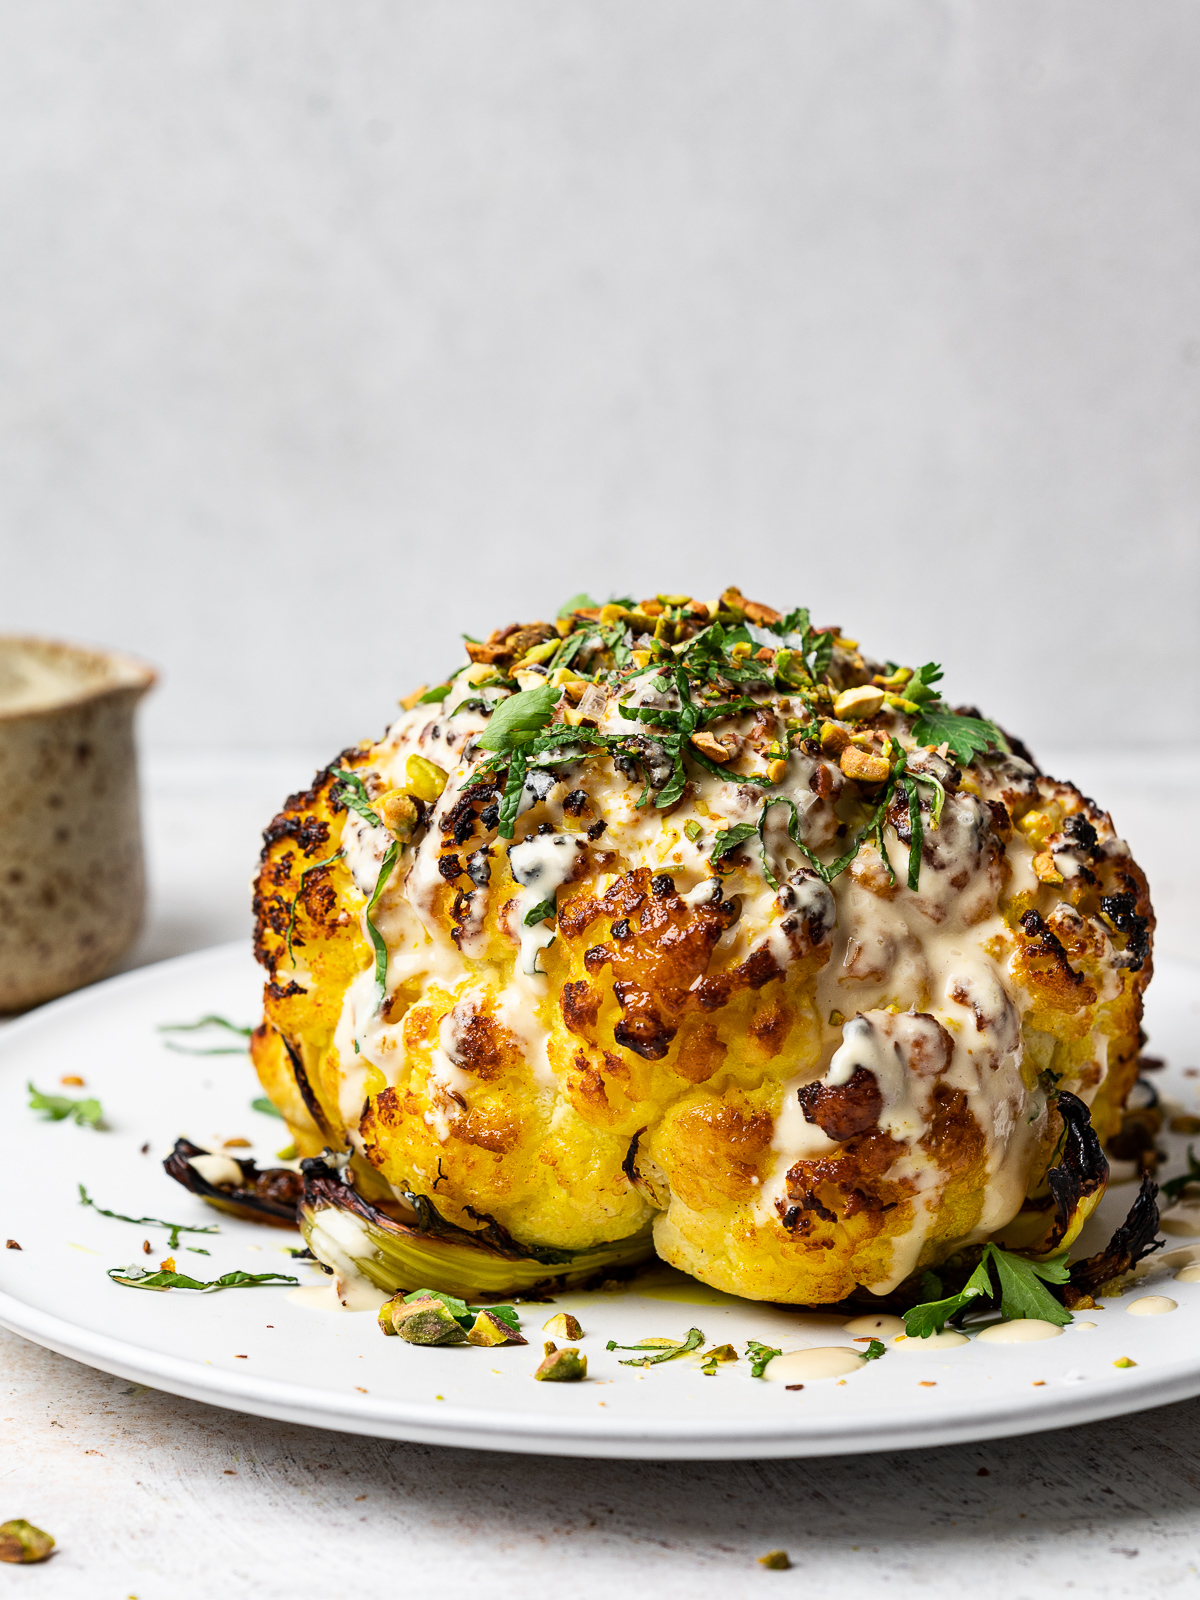 Whole roasted cauliflower drizzled with tahini sauce, fresh herbs and pistachios